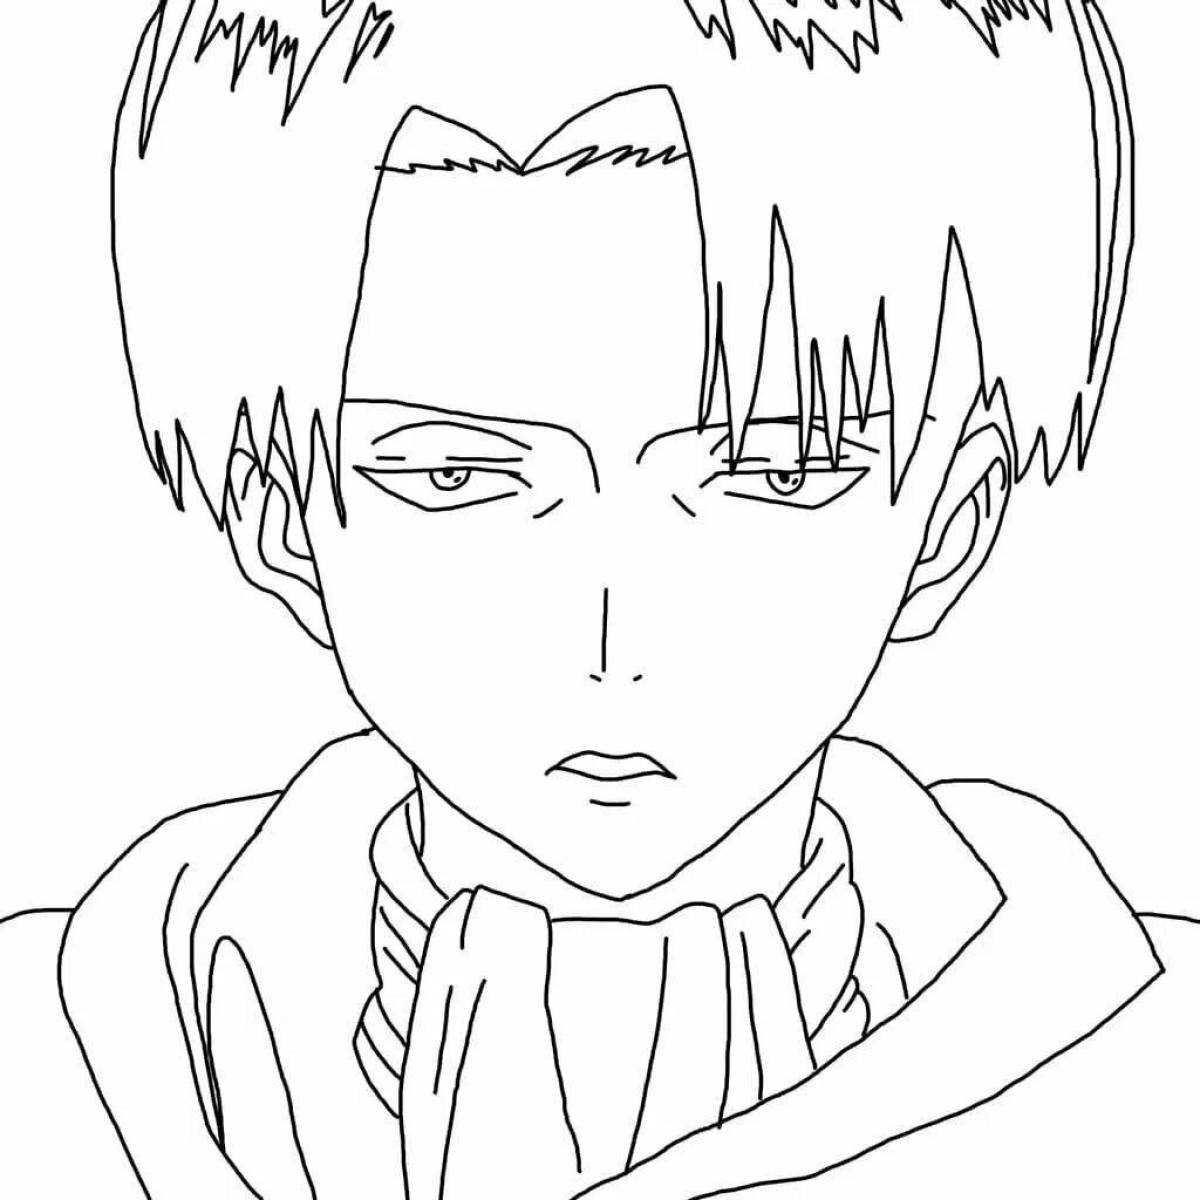 Exciting coloring attack on titan levi